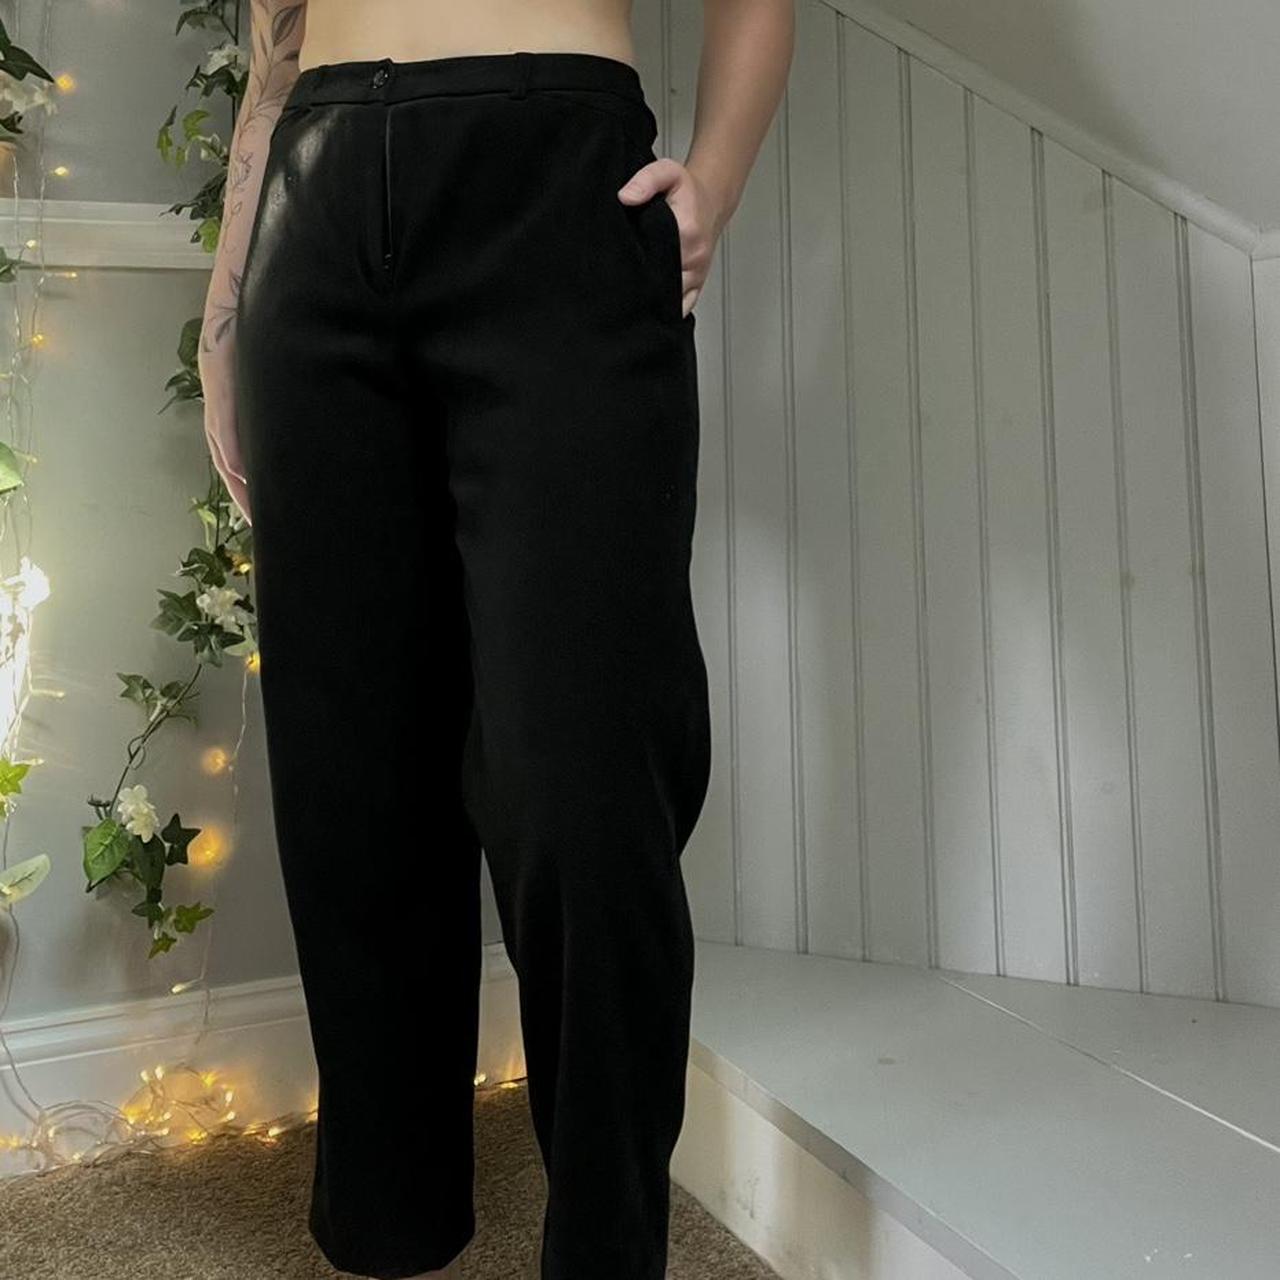 Oversized Tailored Trousers Black